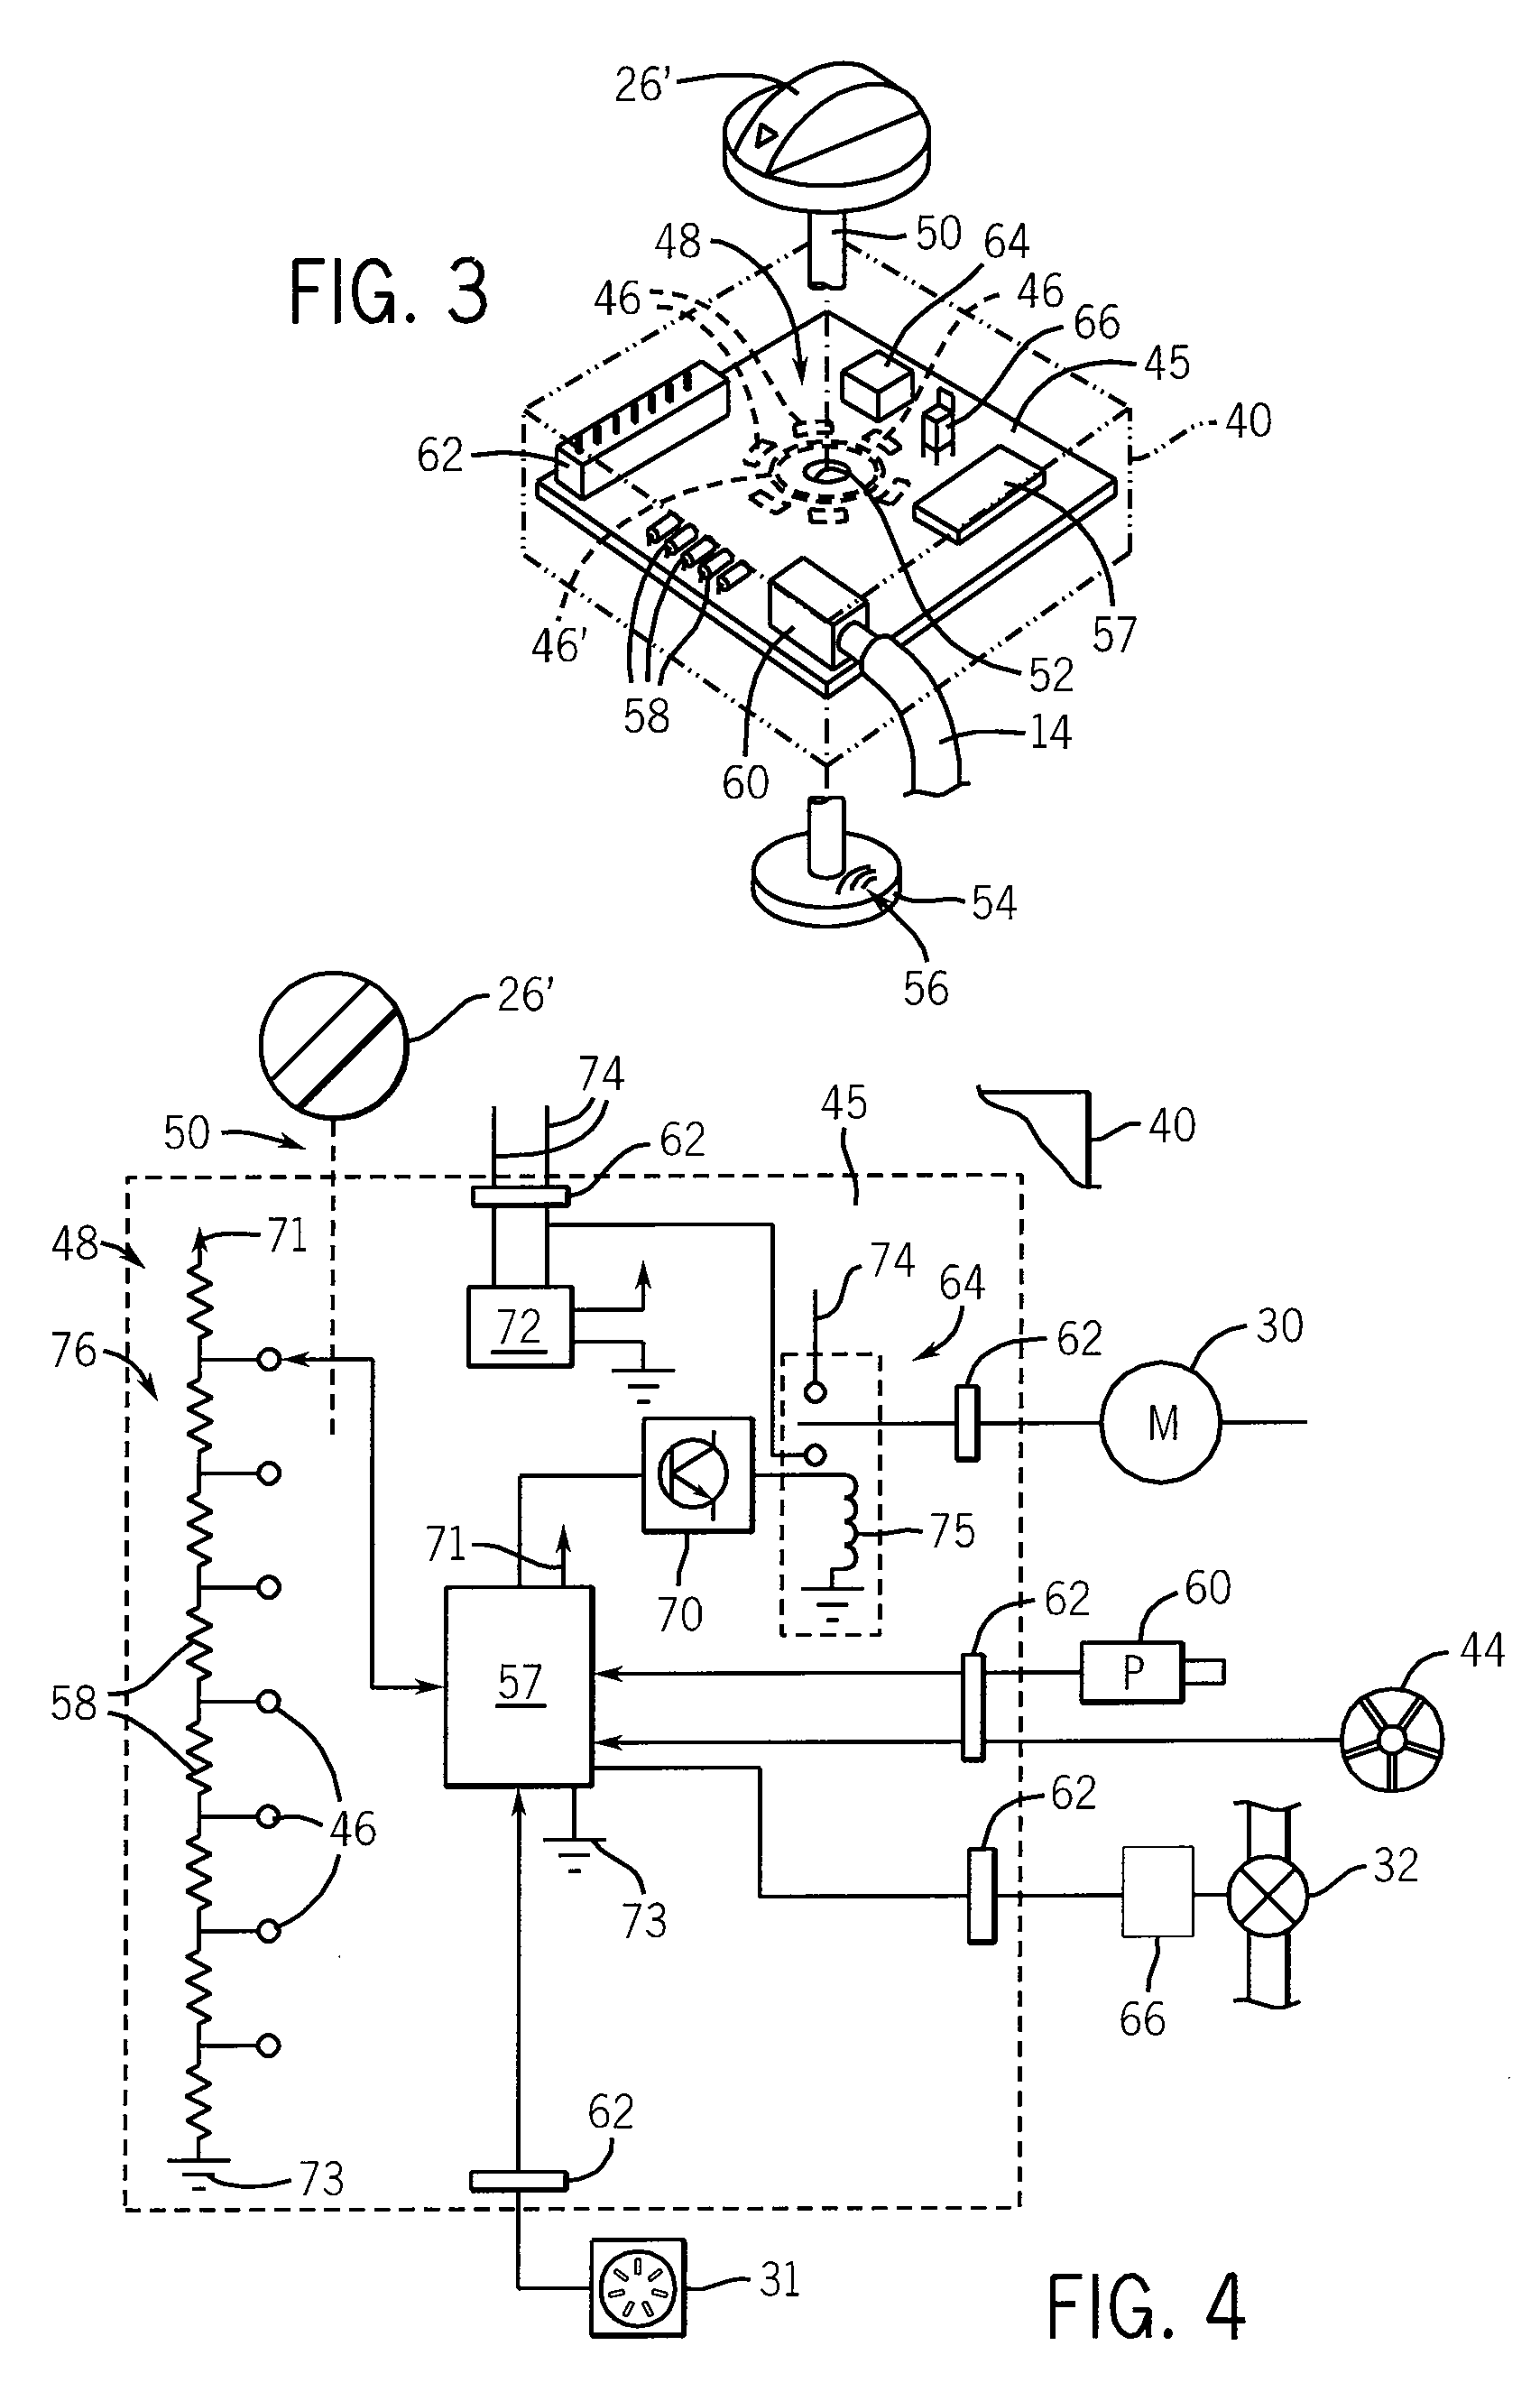 Method and apparatus for upgrading washing machine water efficiency